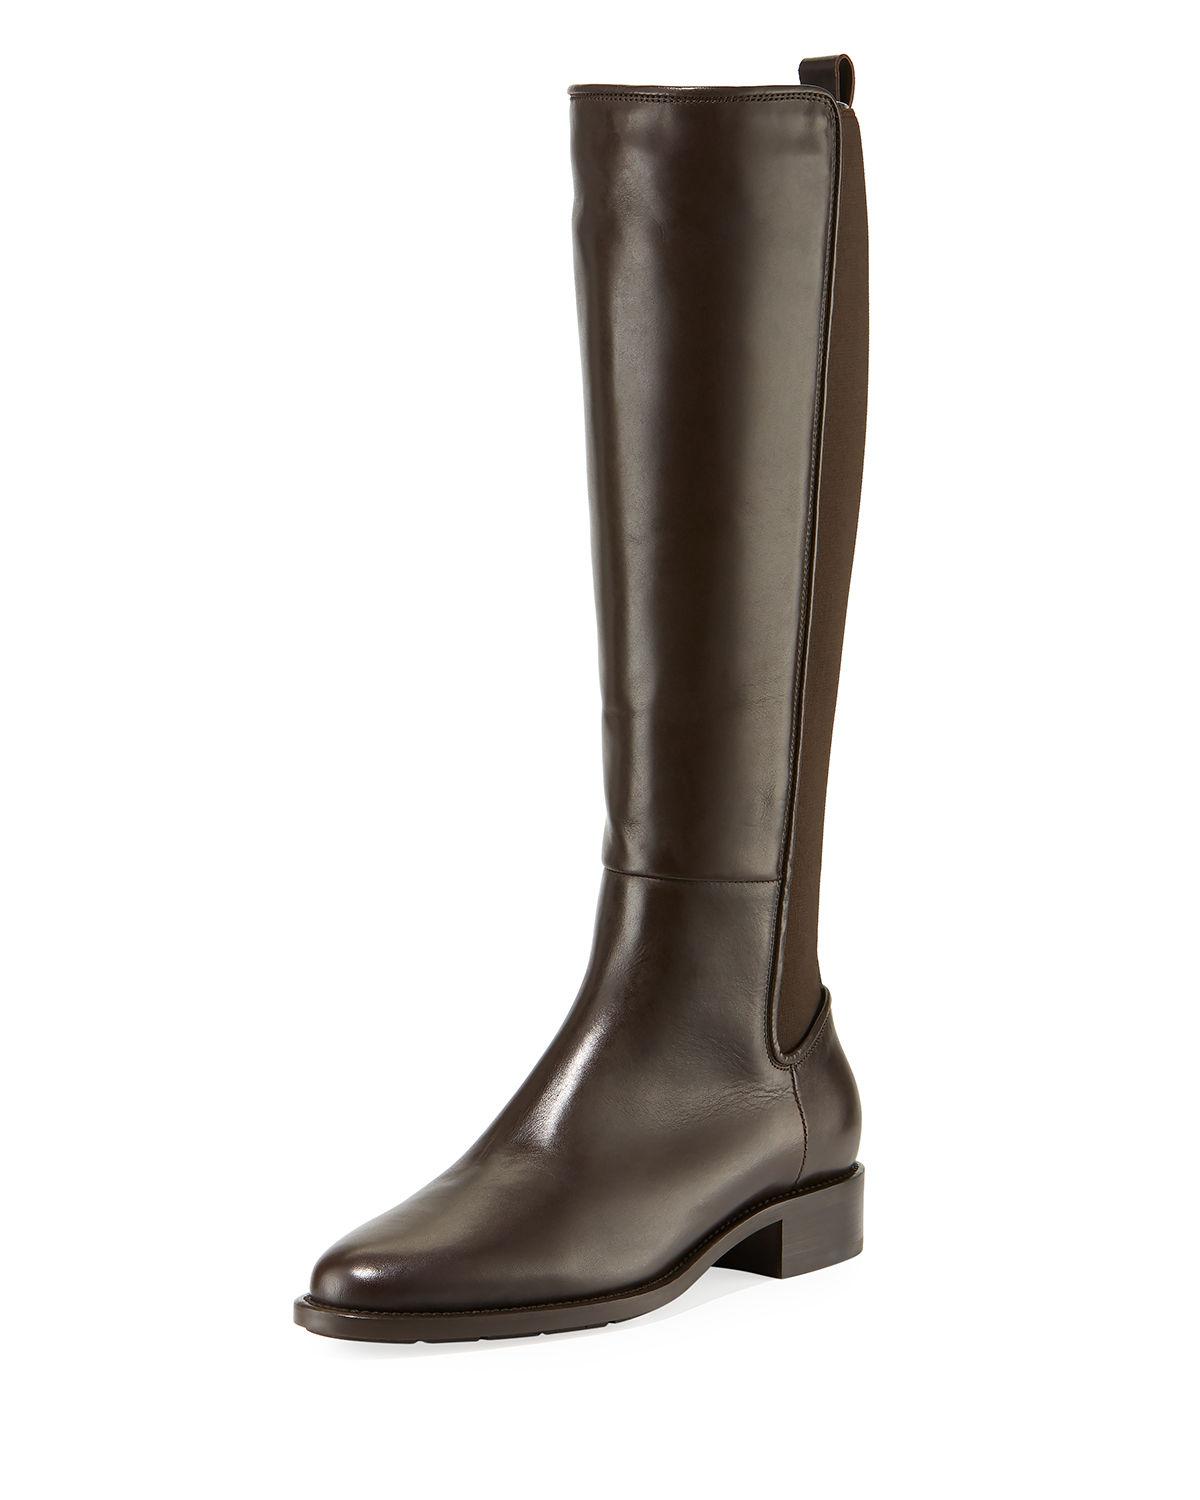 Lyst - Aquatalia Nastia Tall Leather Riding Boots in Brown